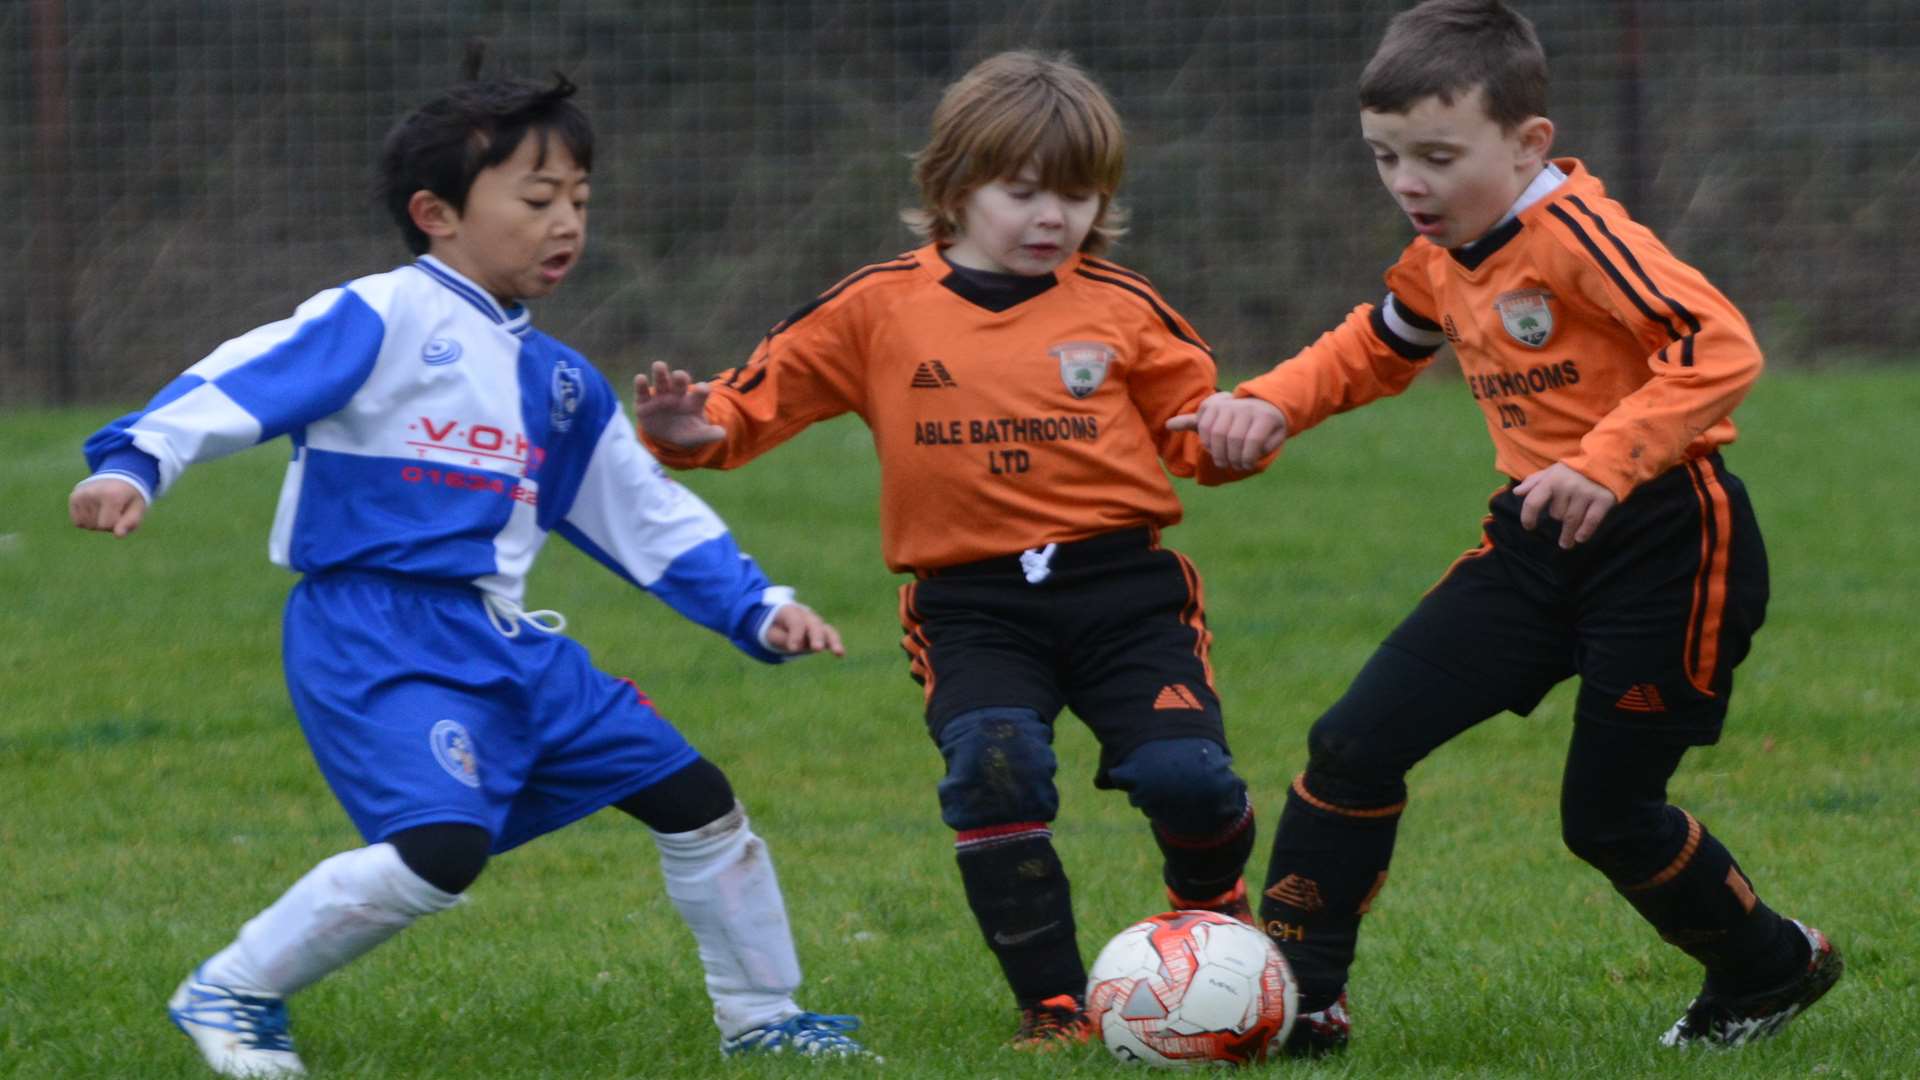 Lordswood Youth under-7s, in orange, up against Bredhurst Juniors Picture: Gary Browne